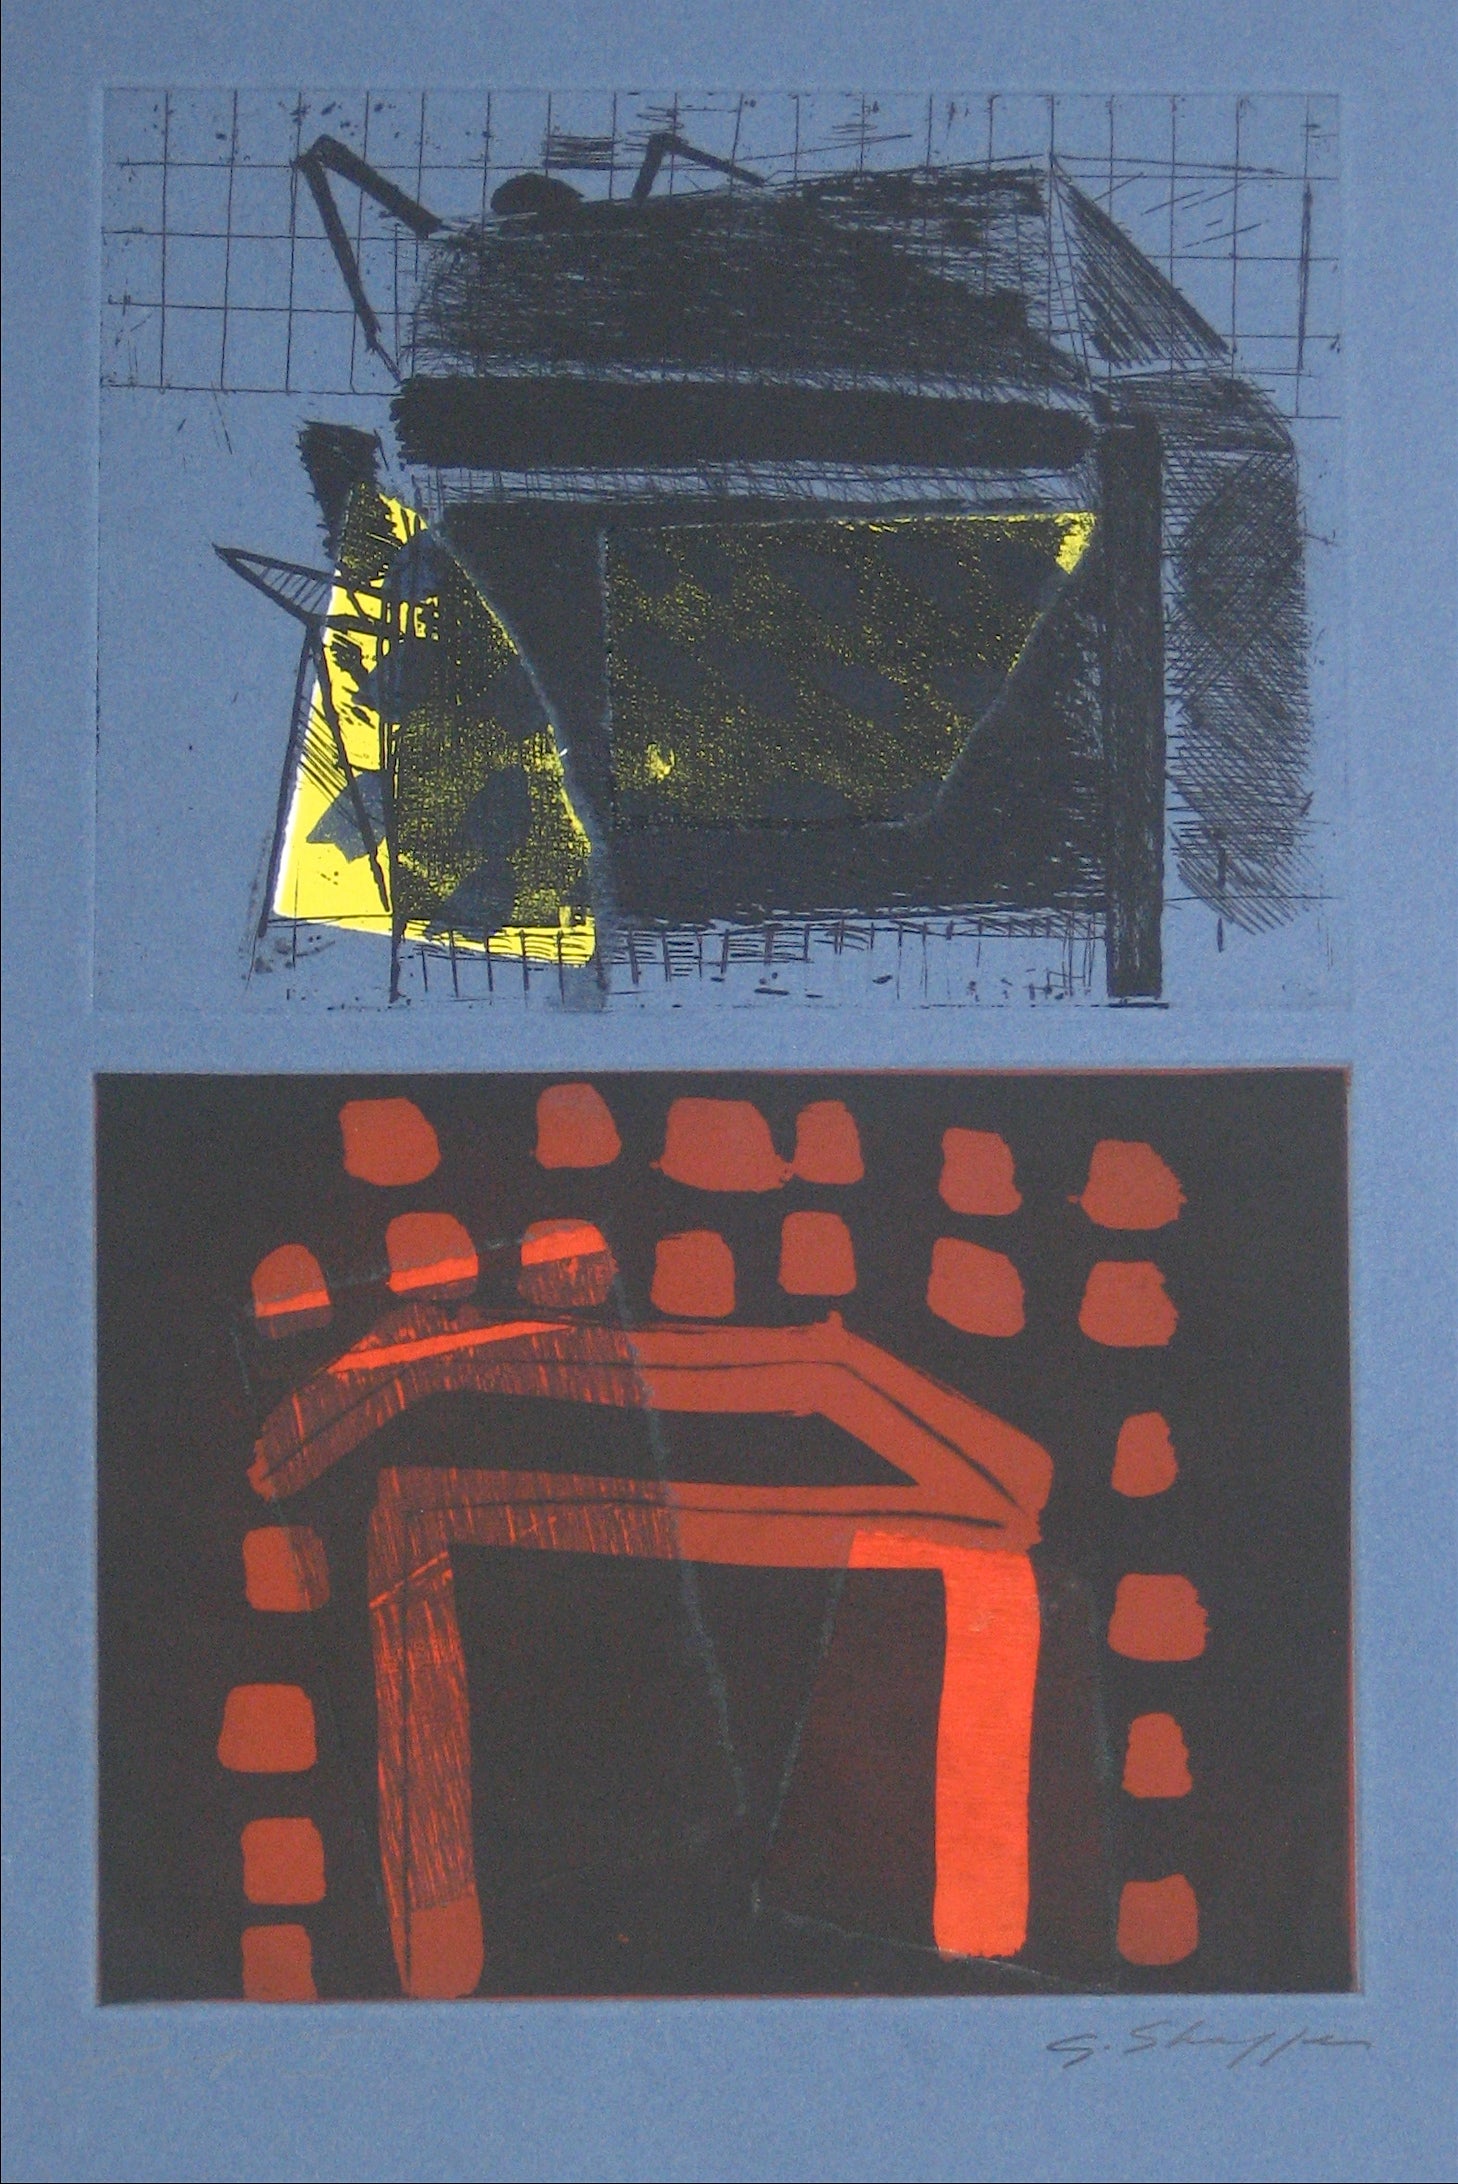 Abstracted Duel Image <br>1989 Litho & Chine Colle <br><br>#11768